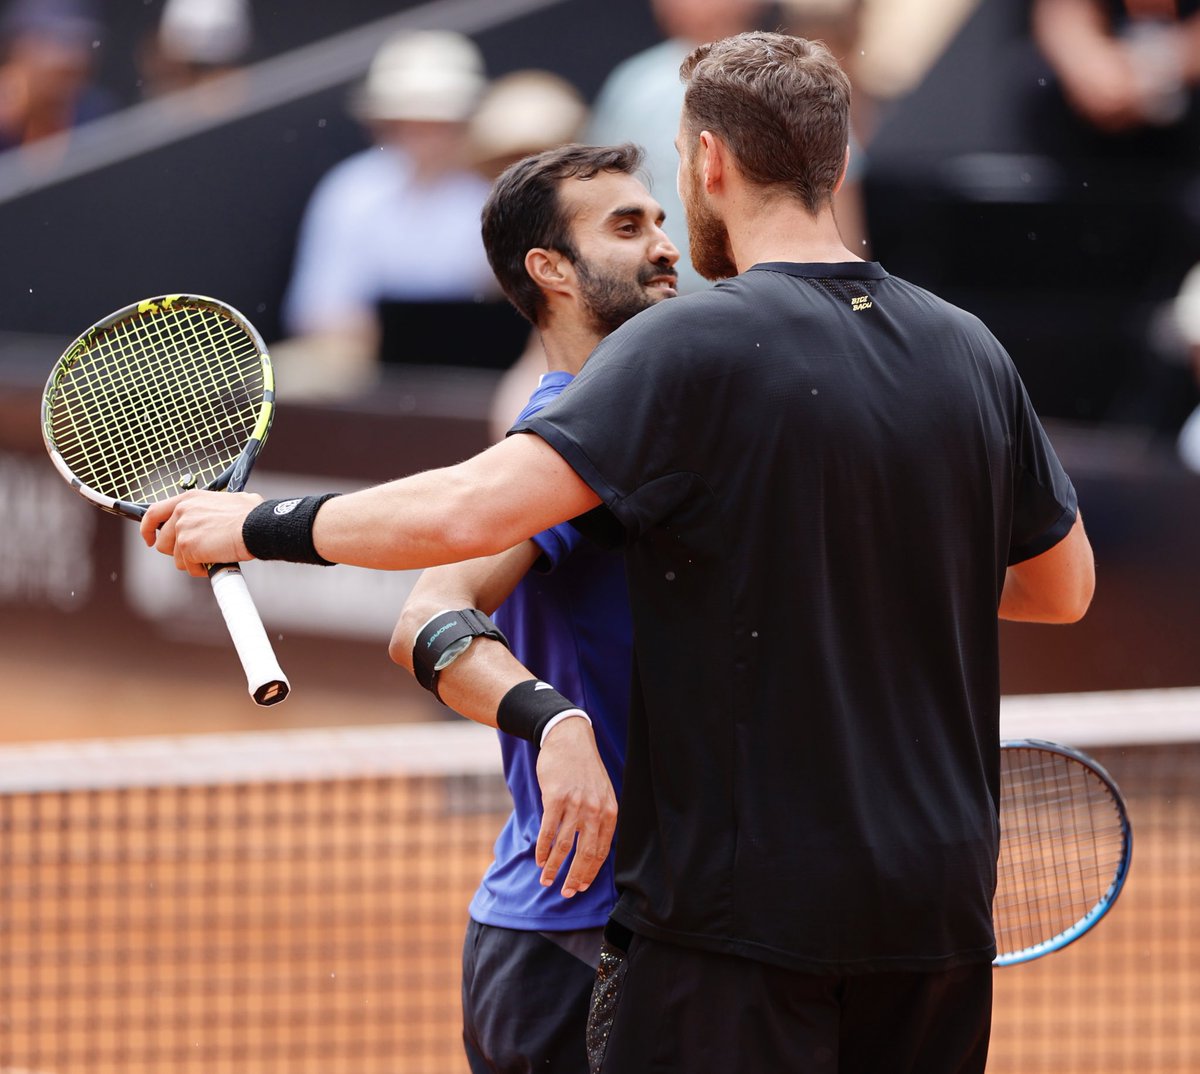 ATP 250 LYON OPEN: 🇮🇳YUKI BHAMBRI AND 🇫🇷ALBANO OLIVETTI ENTER FINALS

Bhambri/Olivetti secure their spot in the finals after a thrilling super tiebreaker victory against top seeds Santiago Gonzalez and Edouard Roger-Vasselin, with a scoreline of 6-3, 6-7, 10-7.

They take on